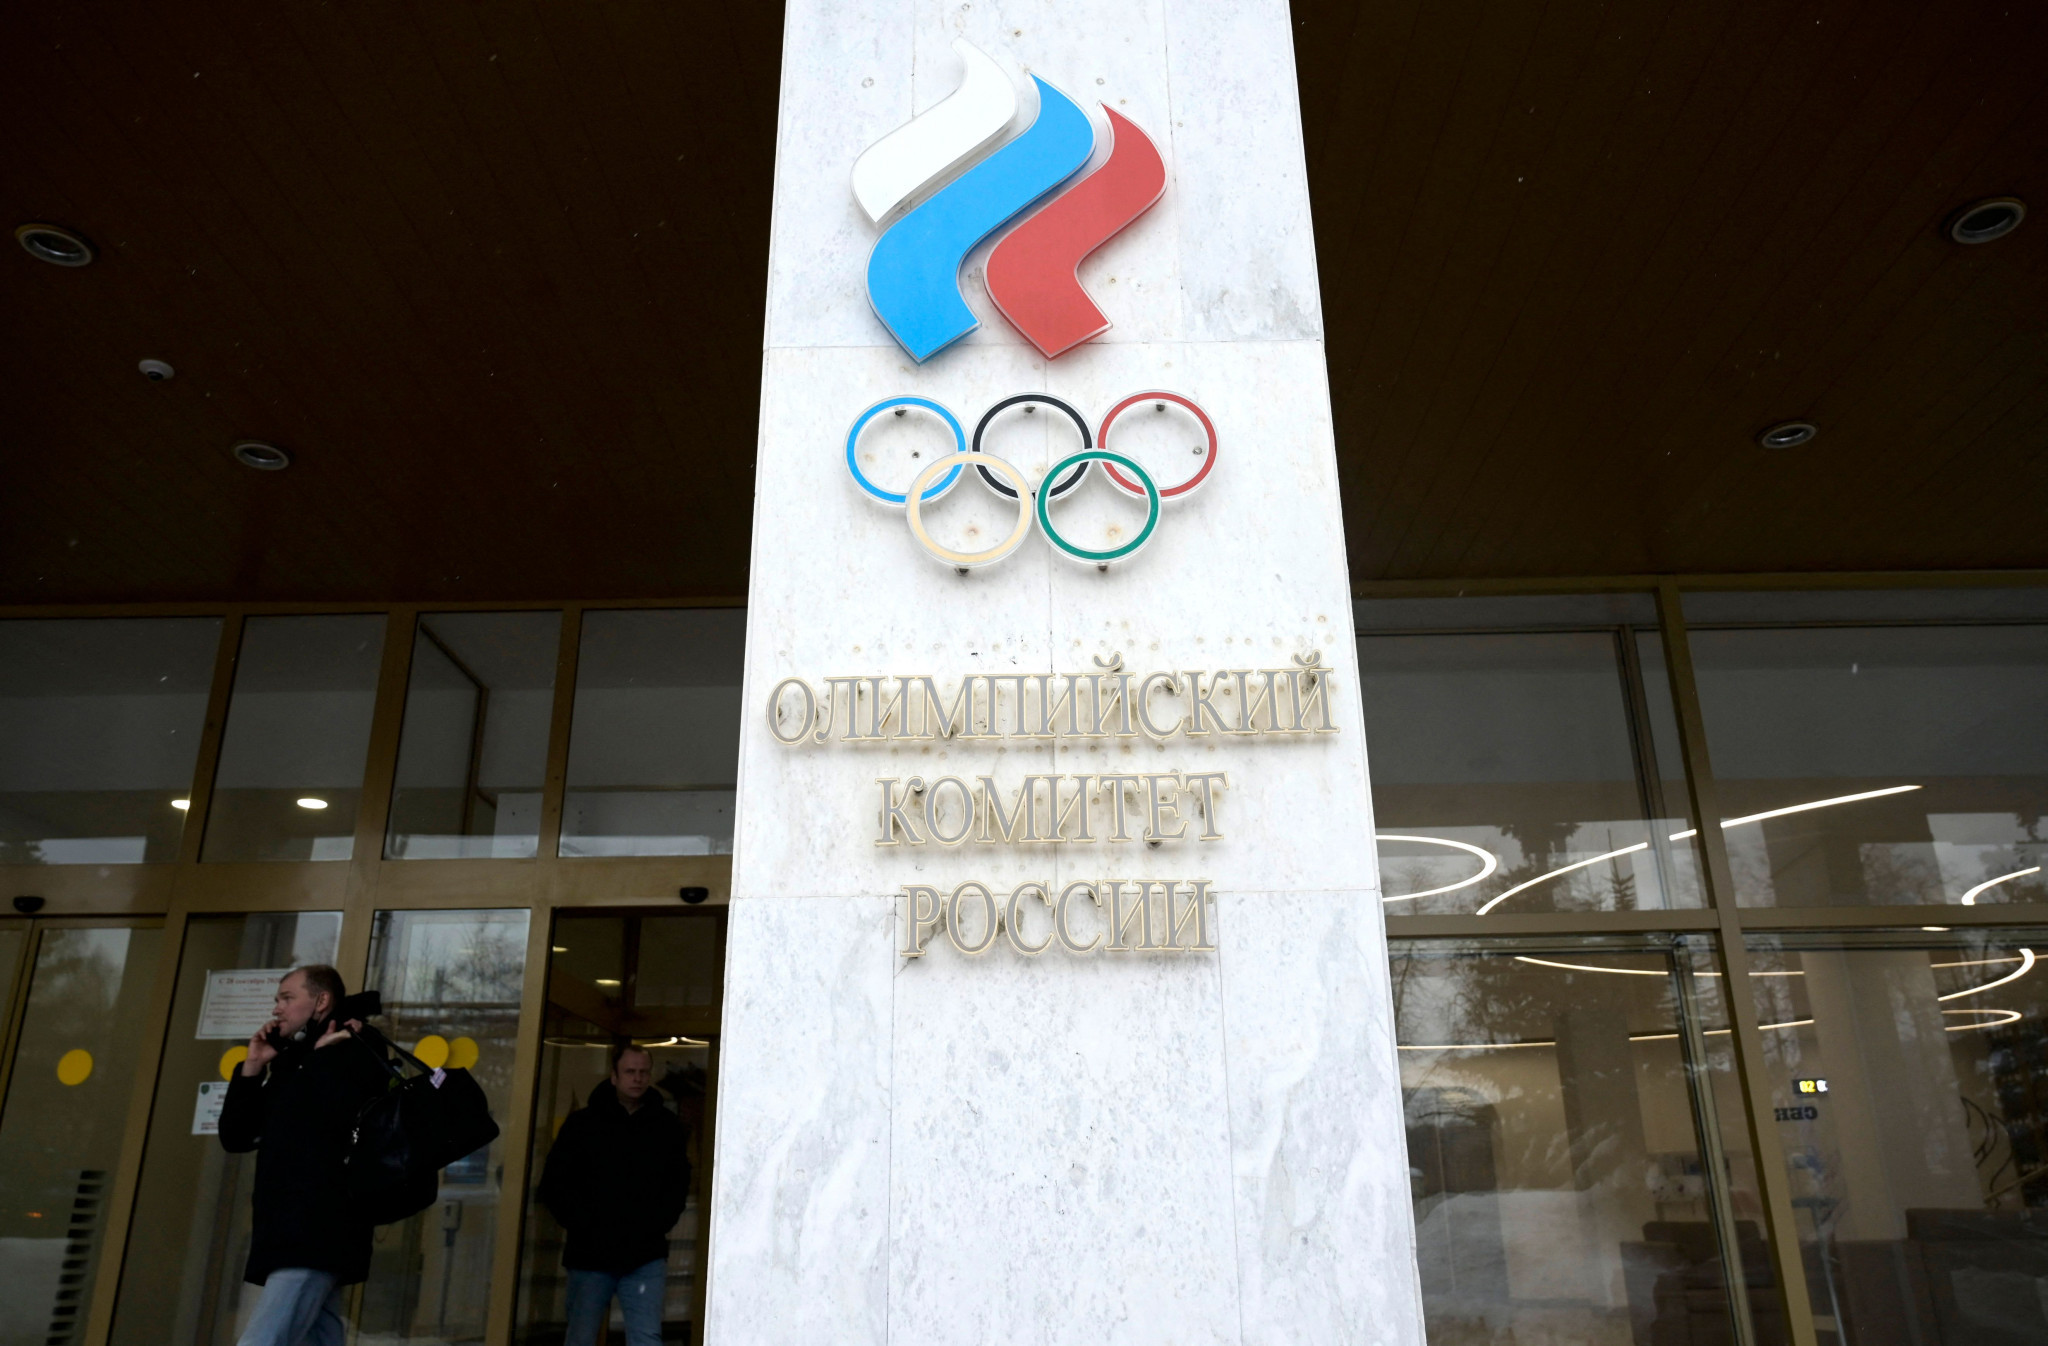 The Russian Olympic Committee is set to attend the ANOC General Assembly in Seoul next week ©Getty Images